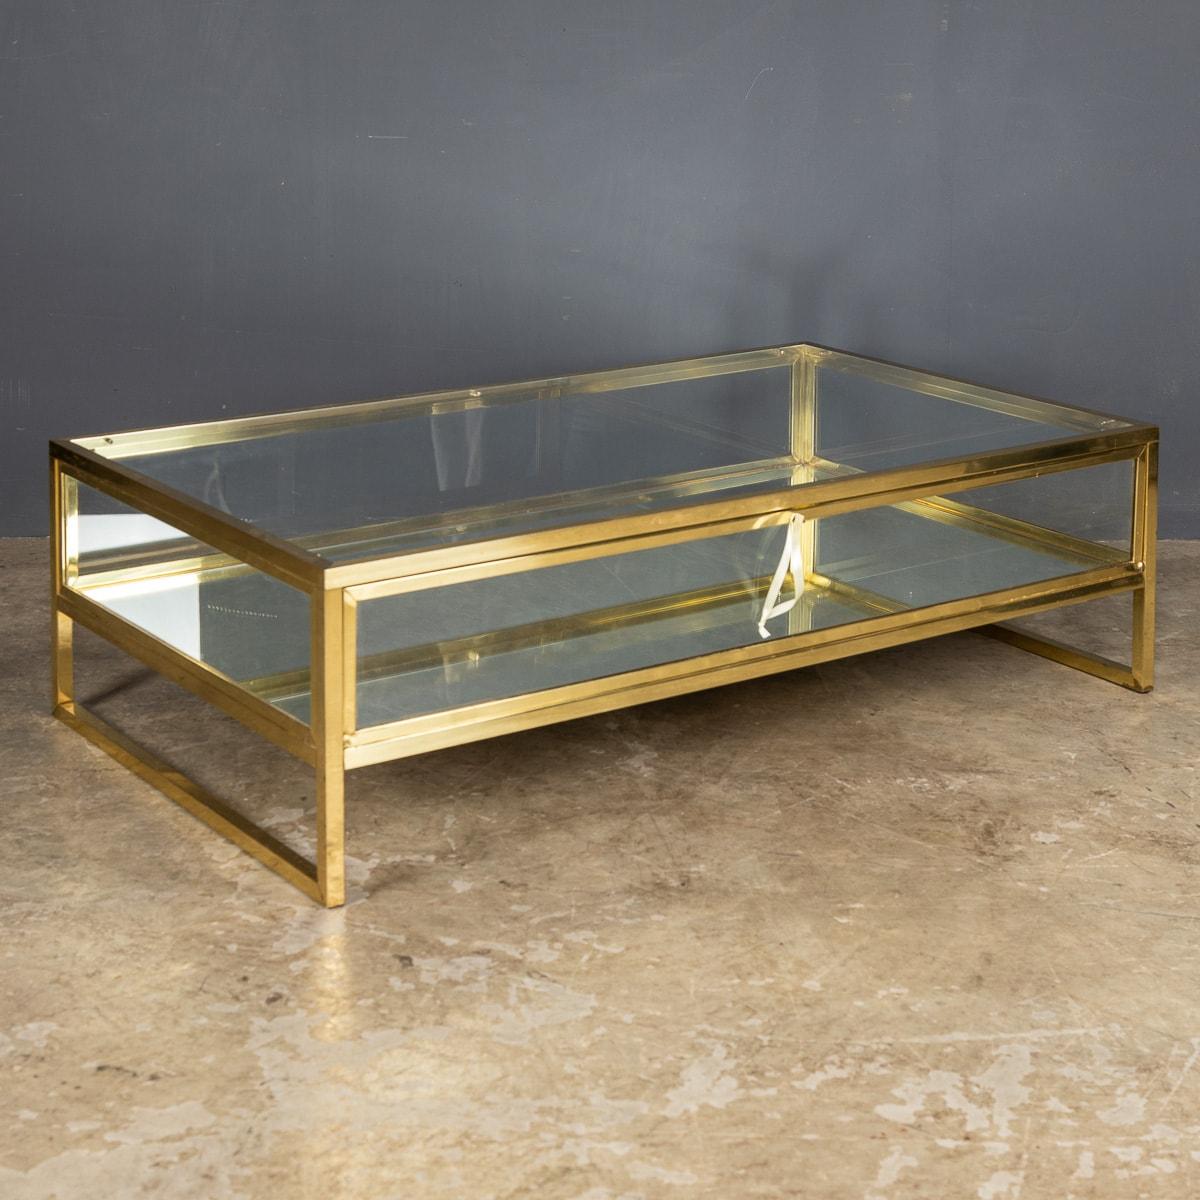 A French vitrine coffee table made by the design house Maison Jansen with gliding glass top. Made in brass with white metal detail and original bevelled glass and mirrored base.

CONDITION
In Great Condition - wear consistent with